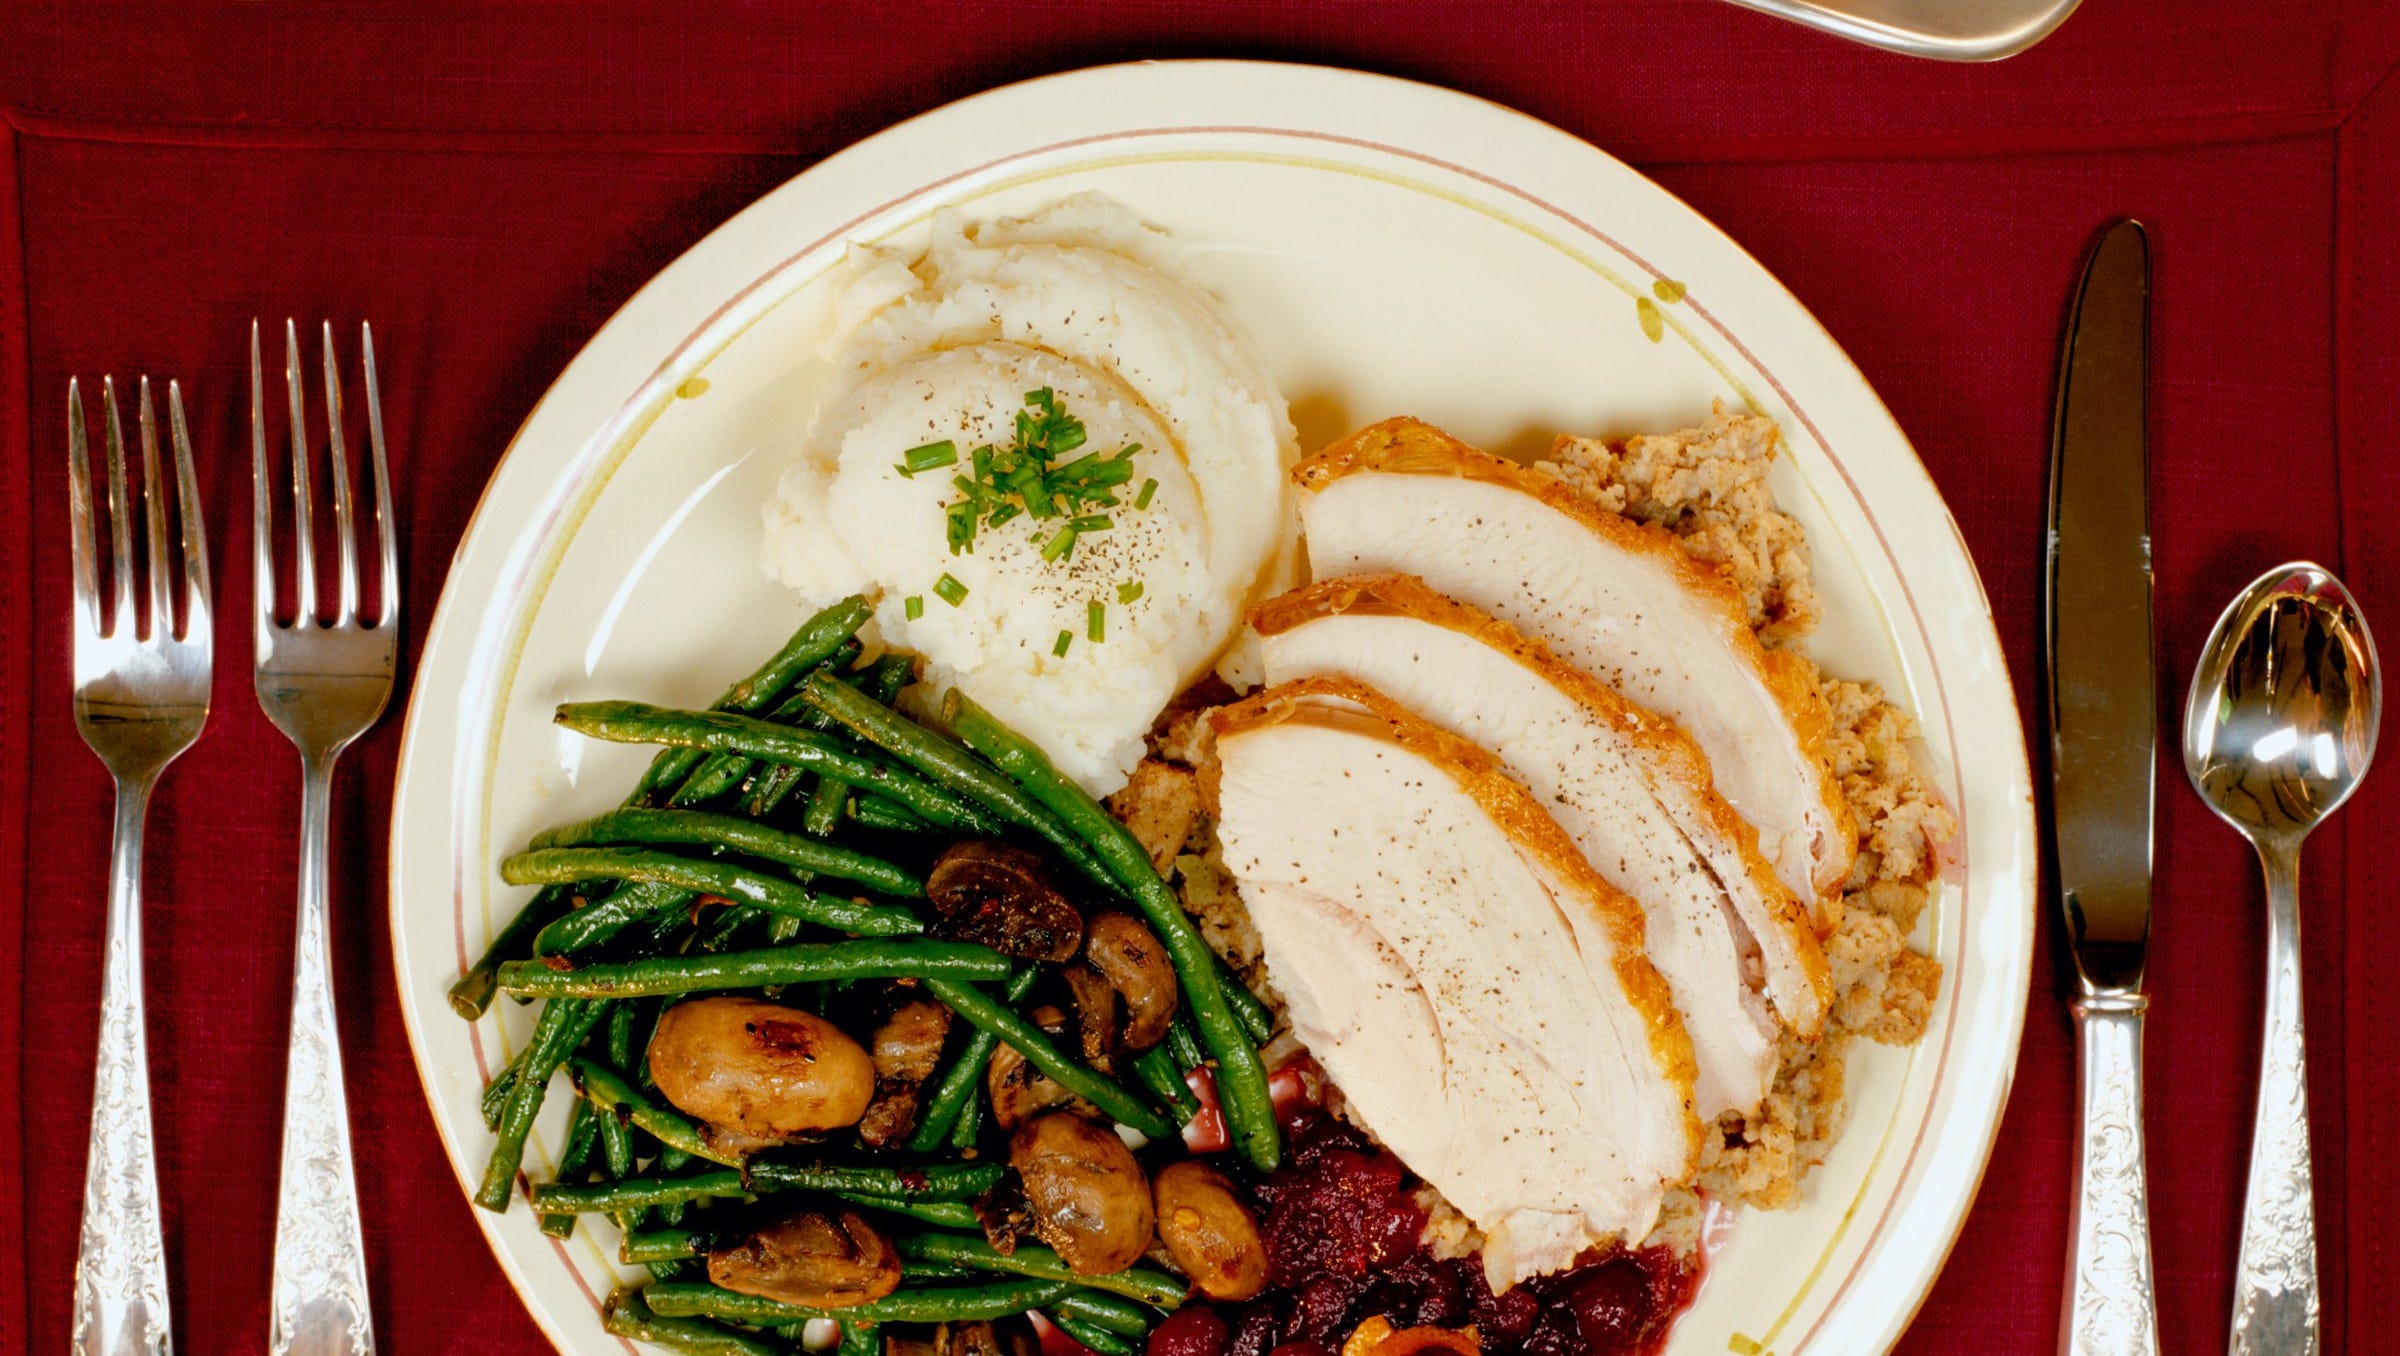 Thanksgiving meal will cost you close to $50